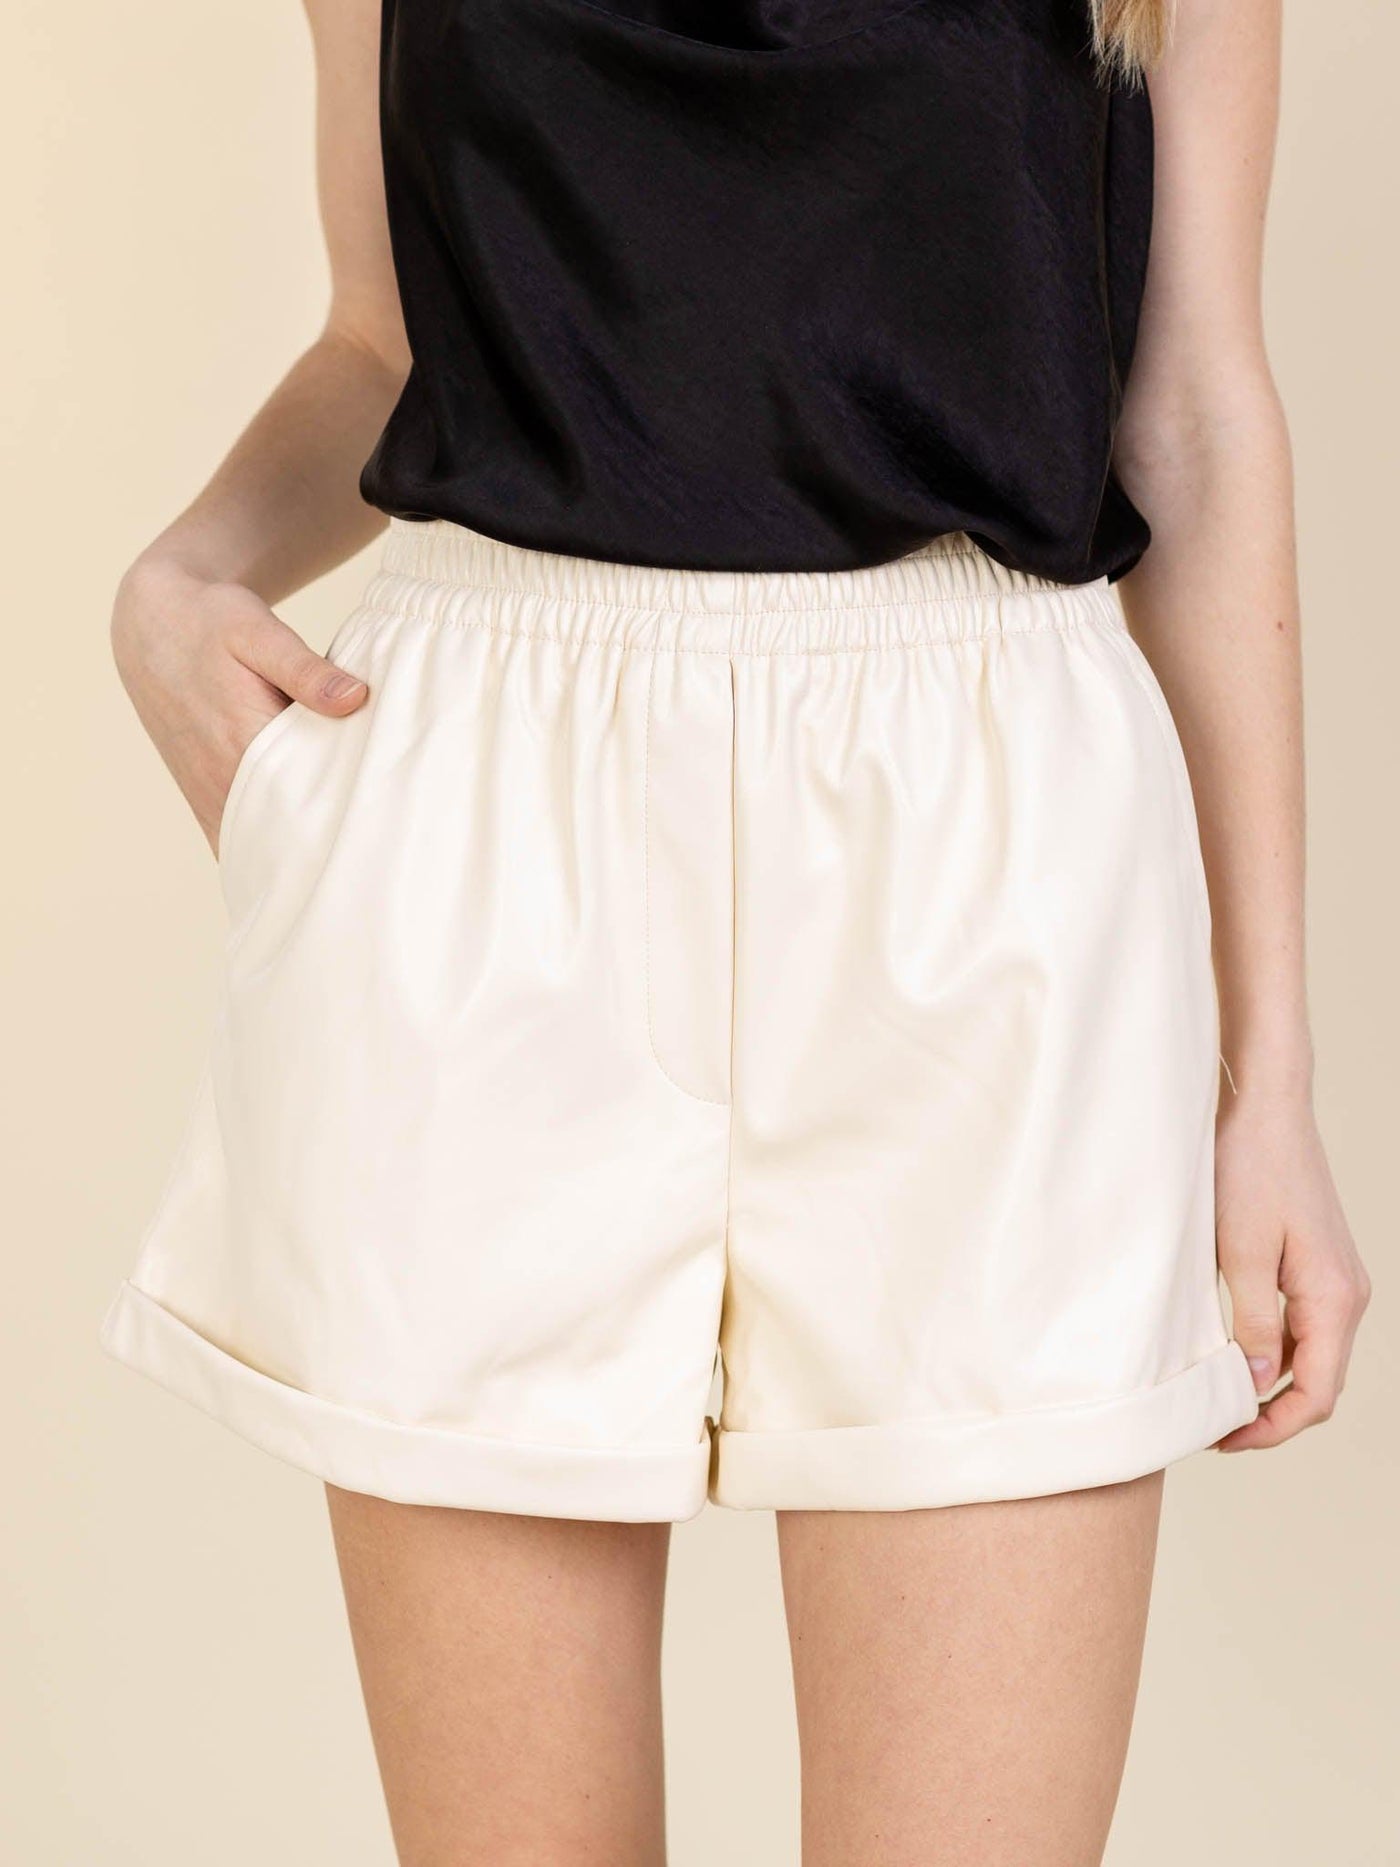 light colored shorts